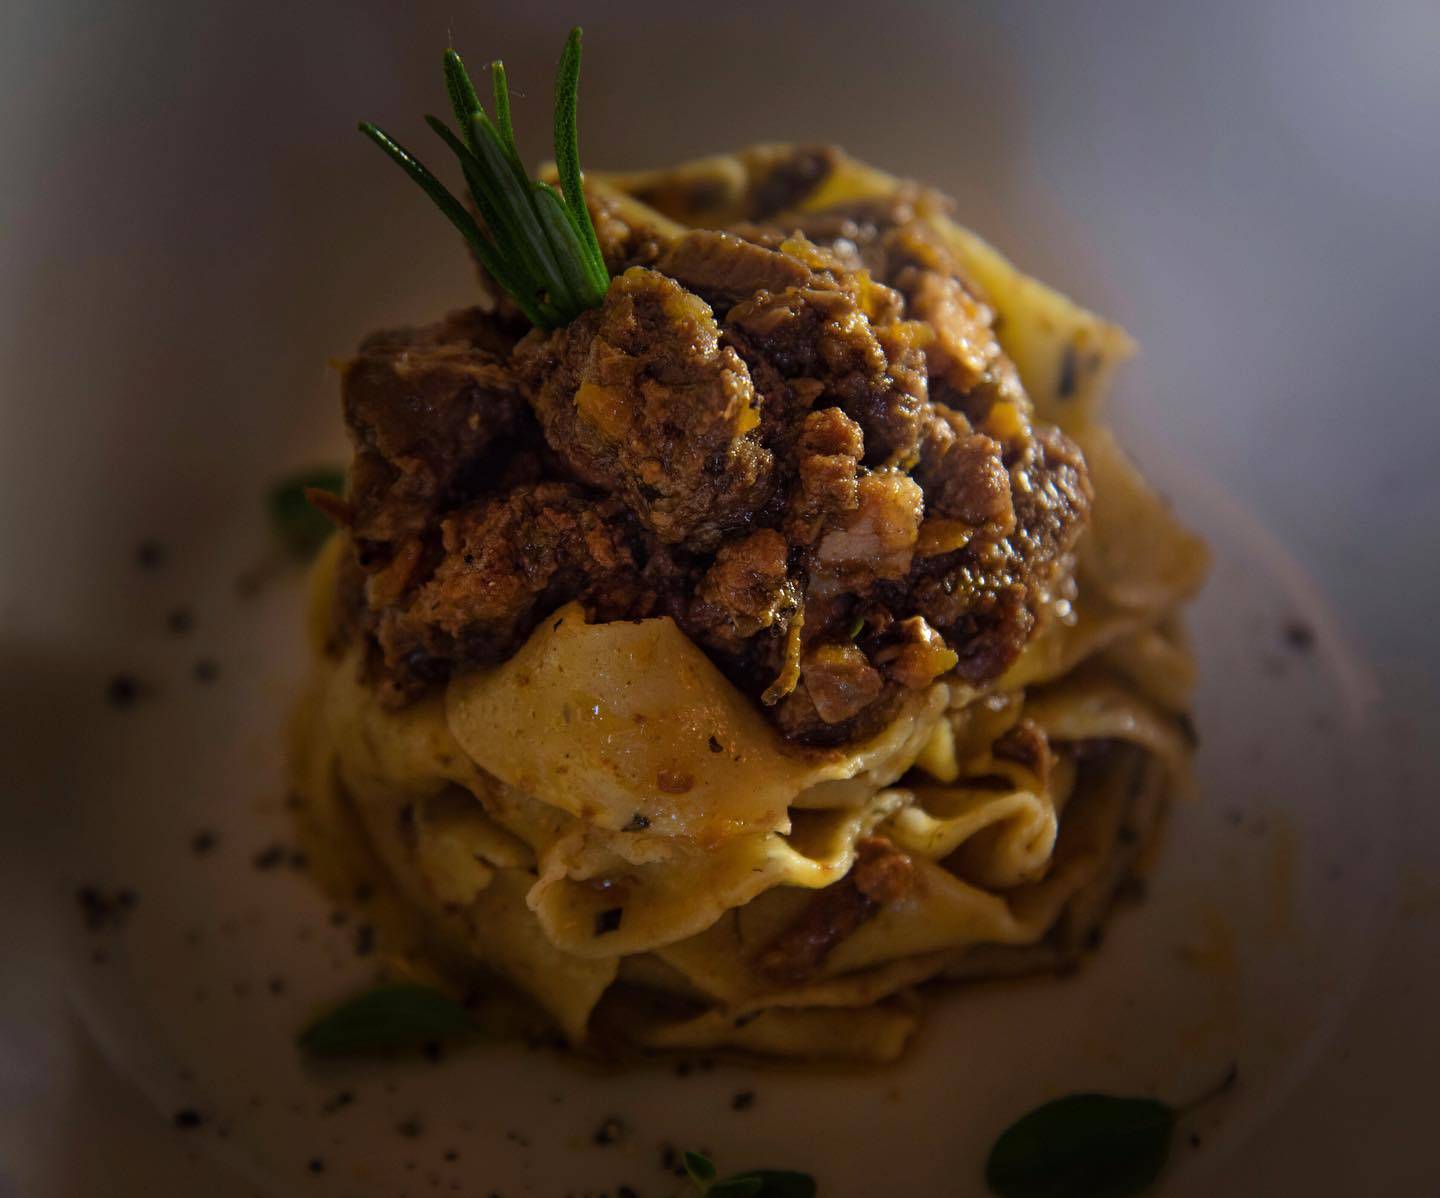 Will our Chef be able to to brighten up your Thursday with pork ribs sauce pappardelle with herbs and orange?